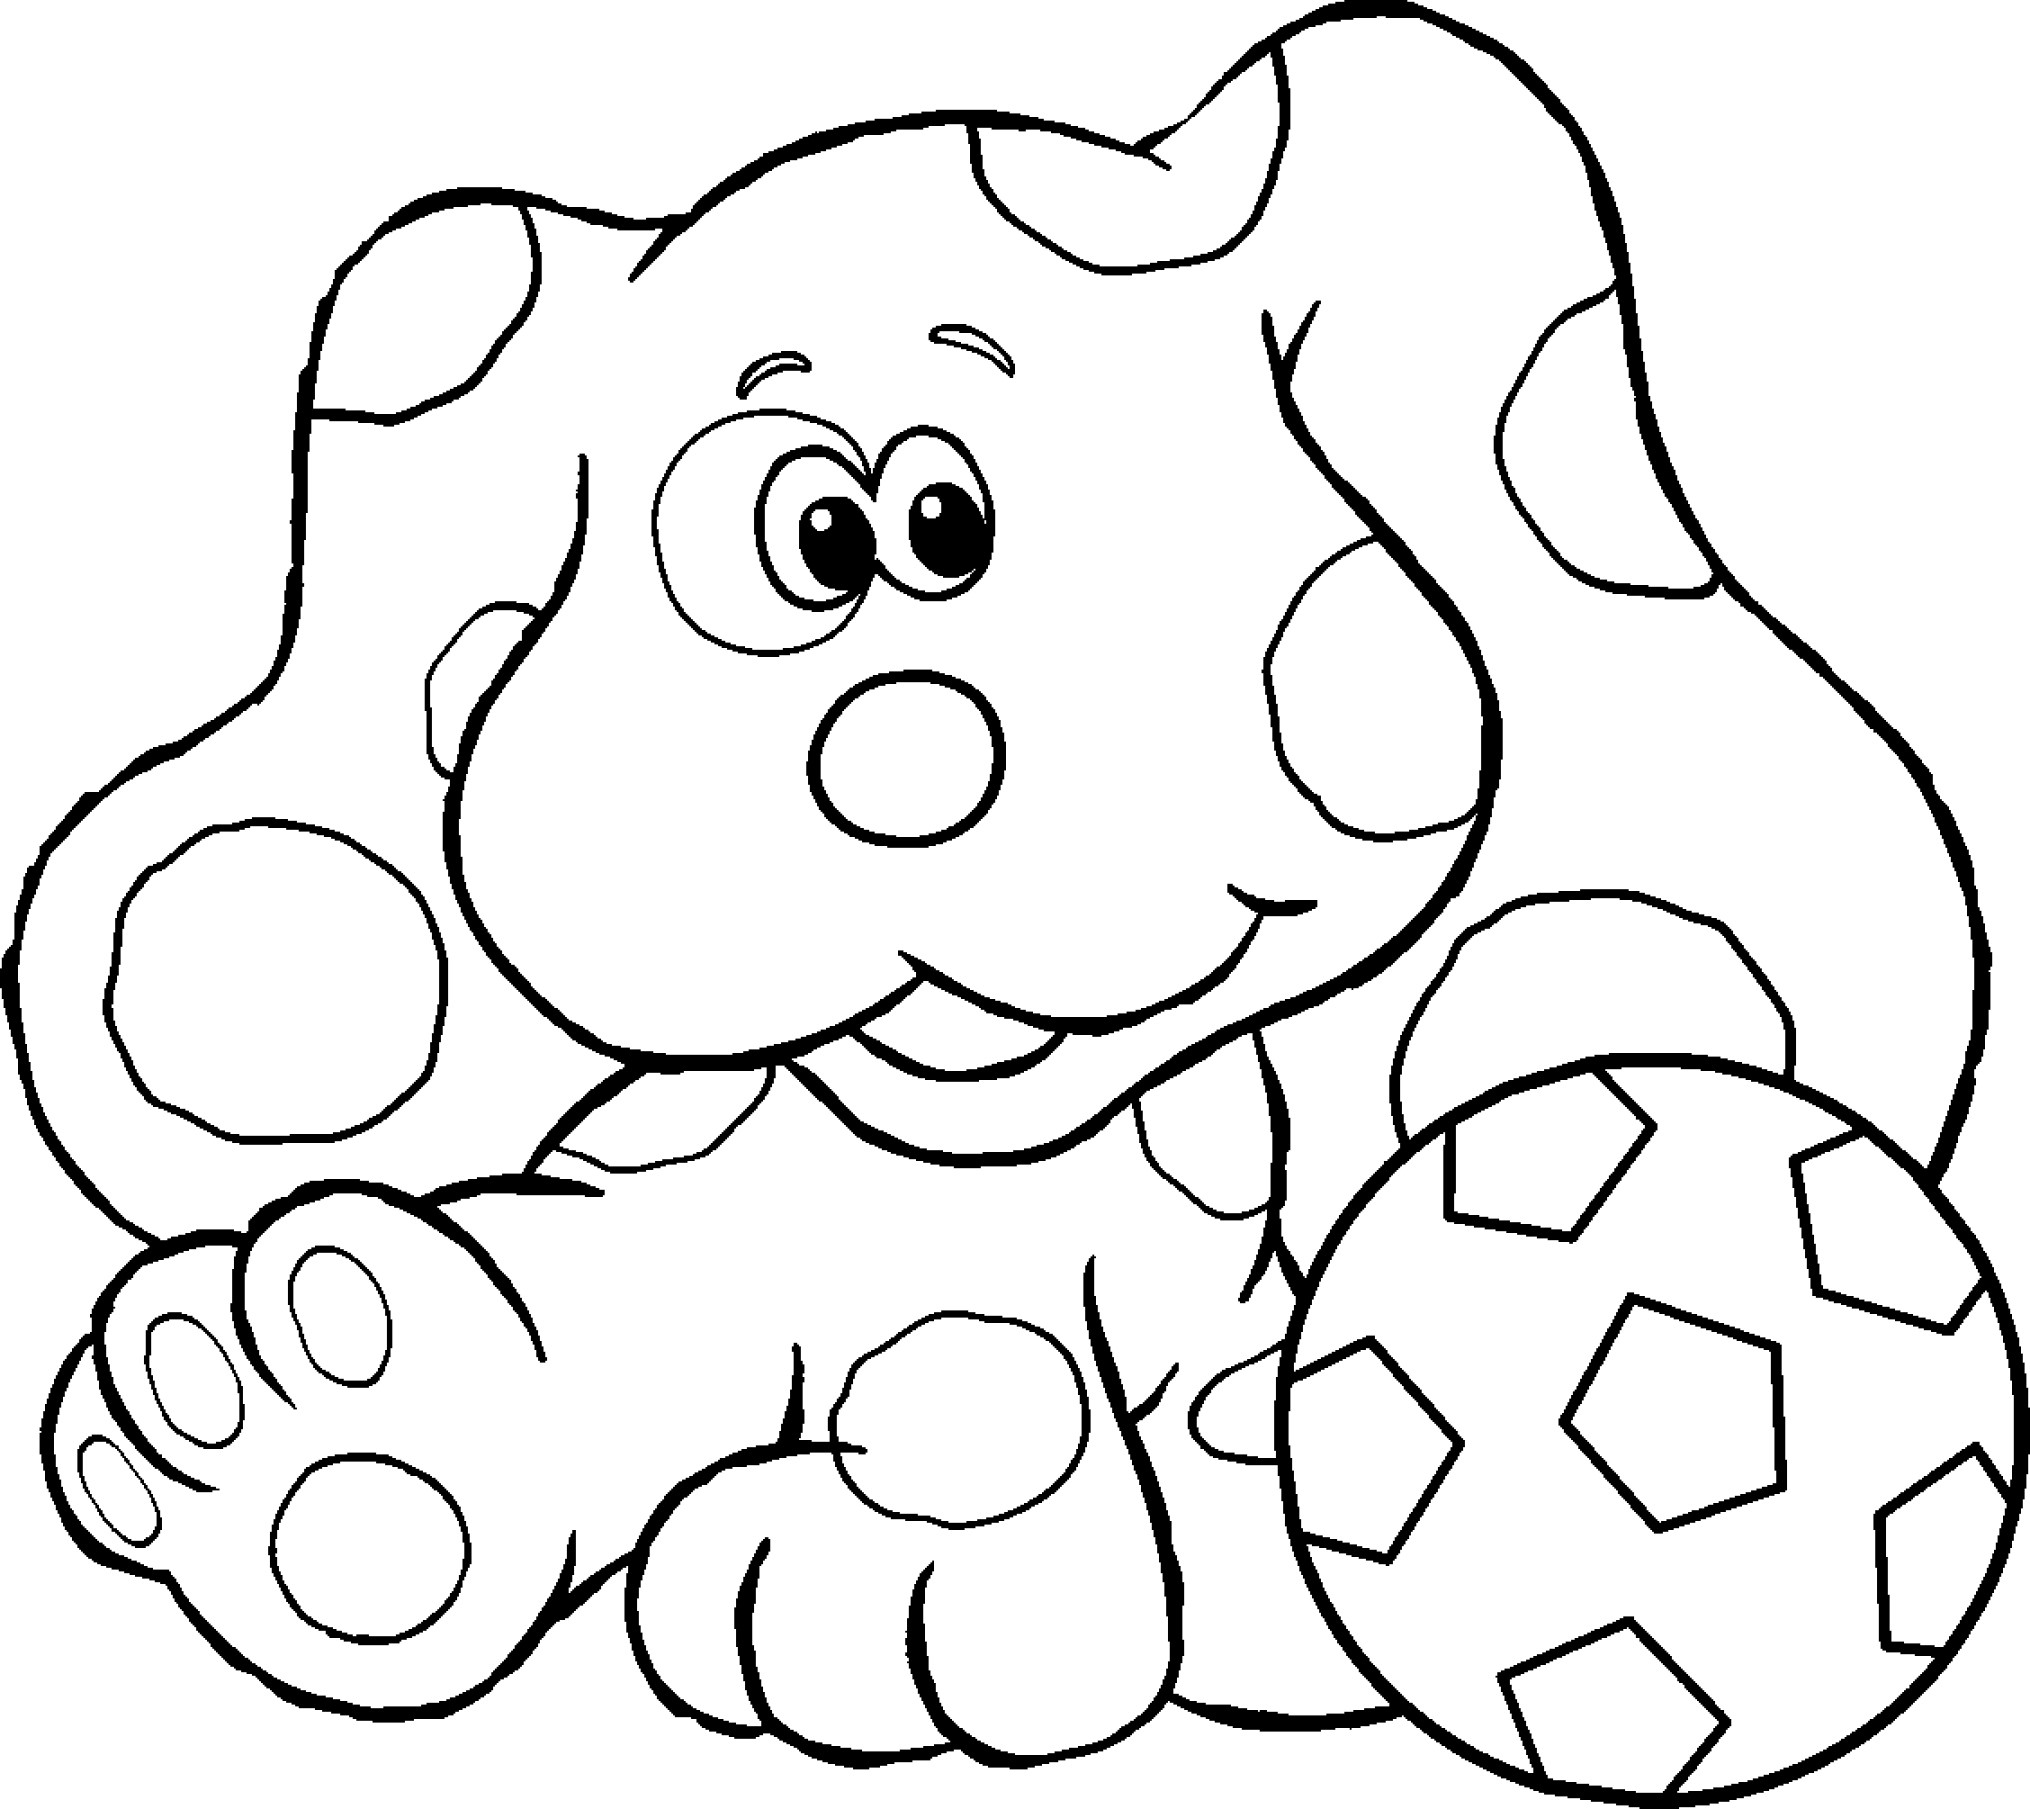 St Louis Blues Coloring Pages at GetColorings.com | Free printable